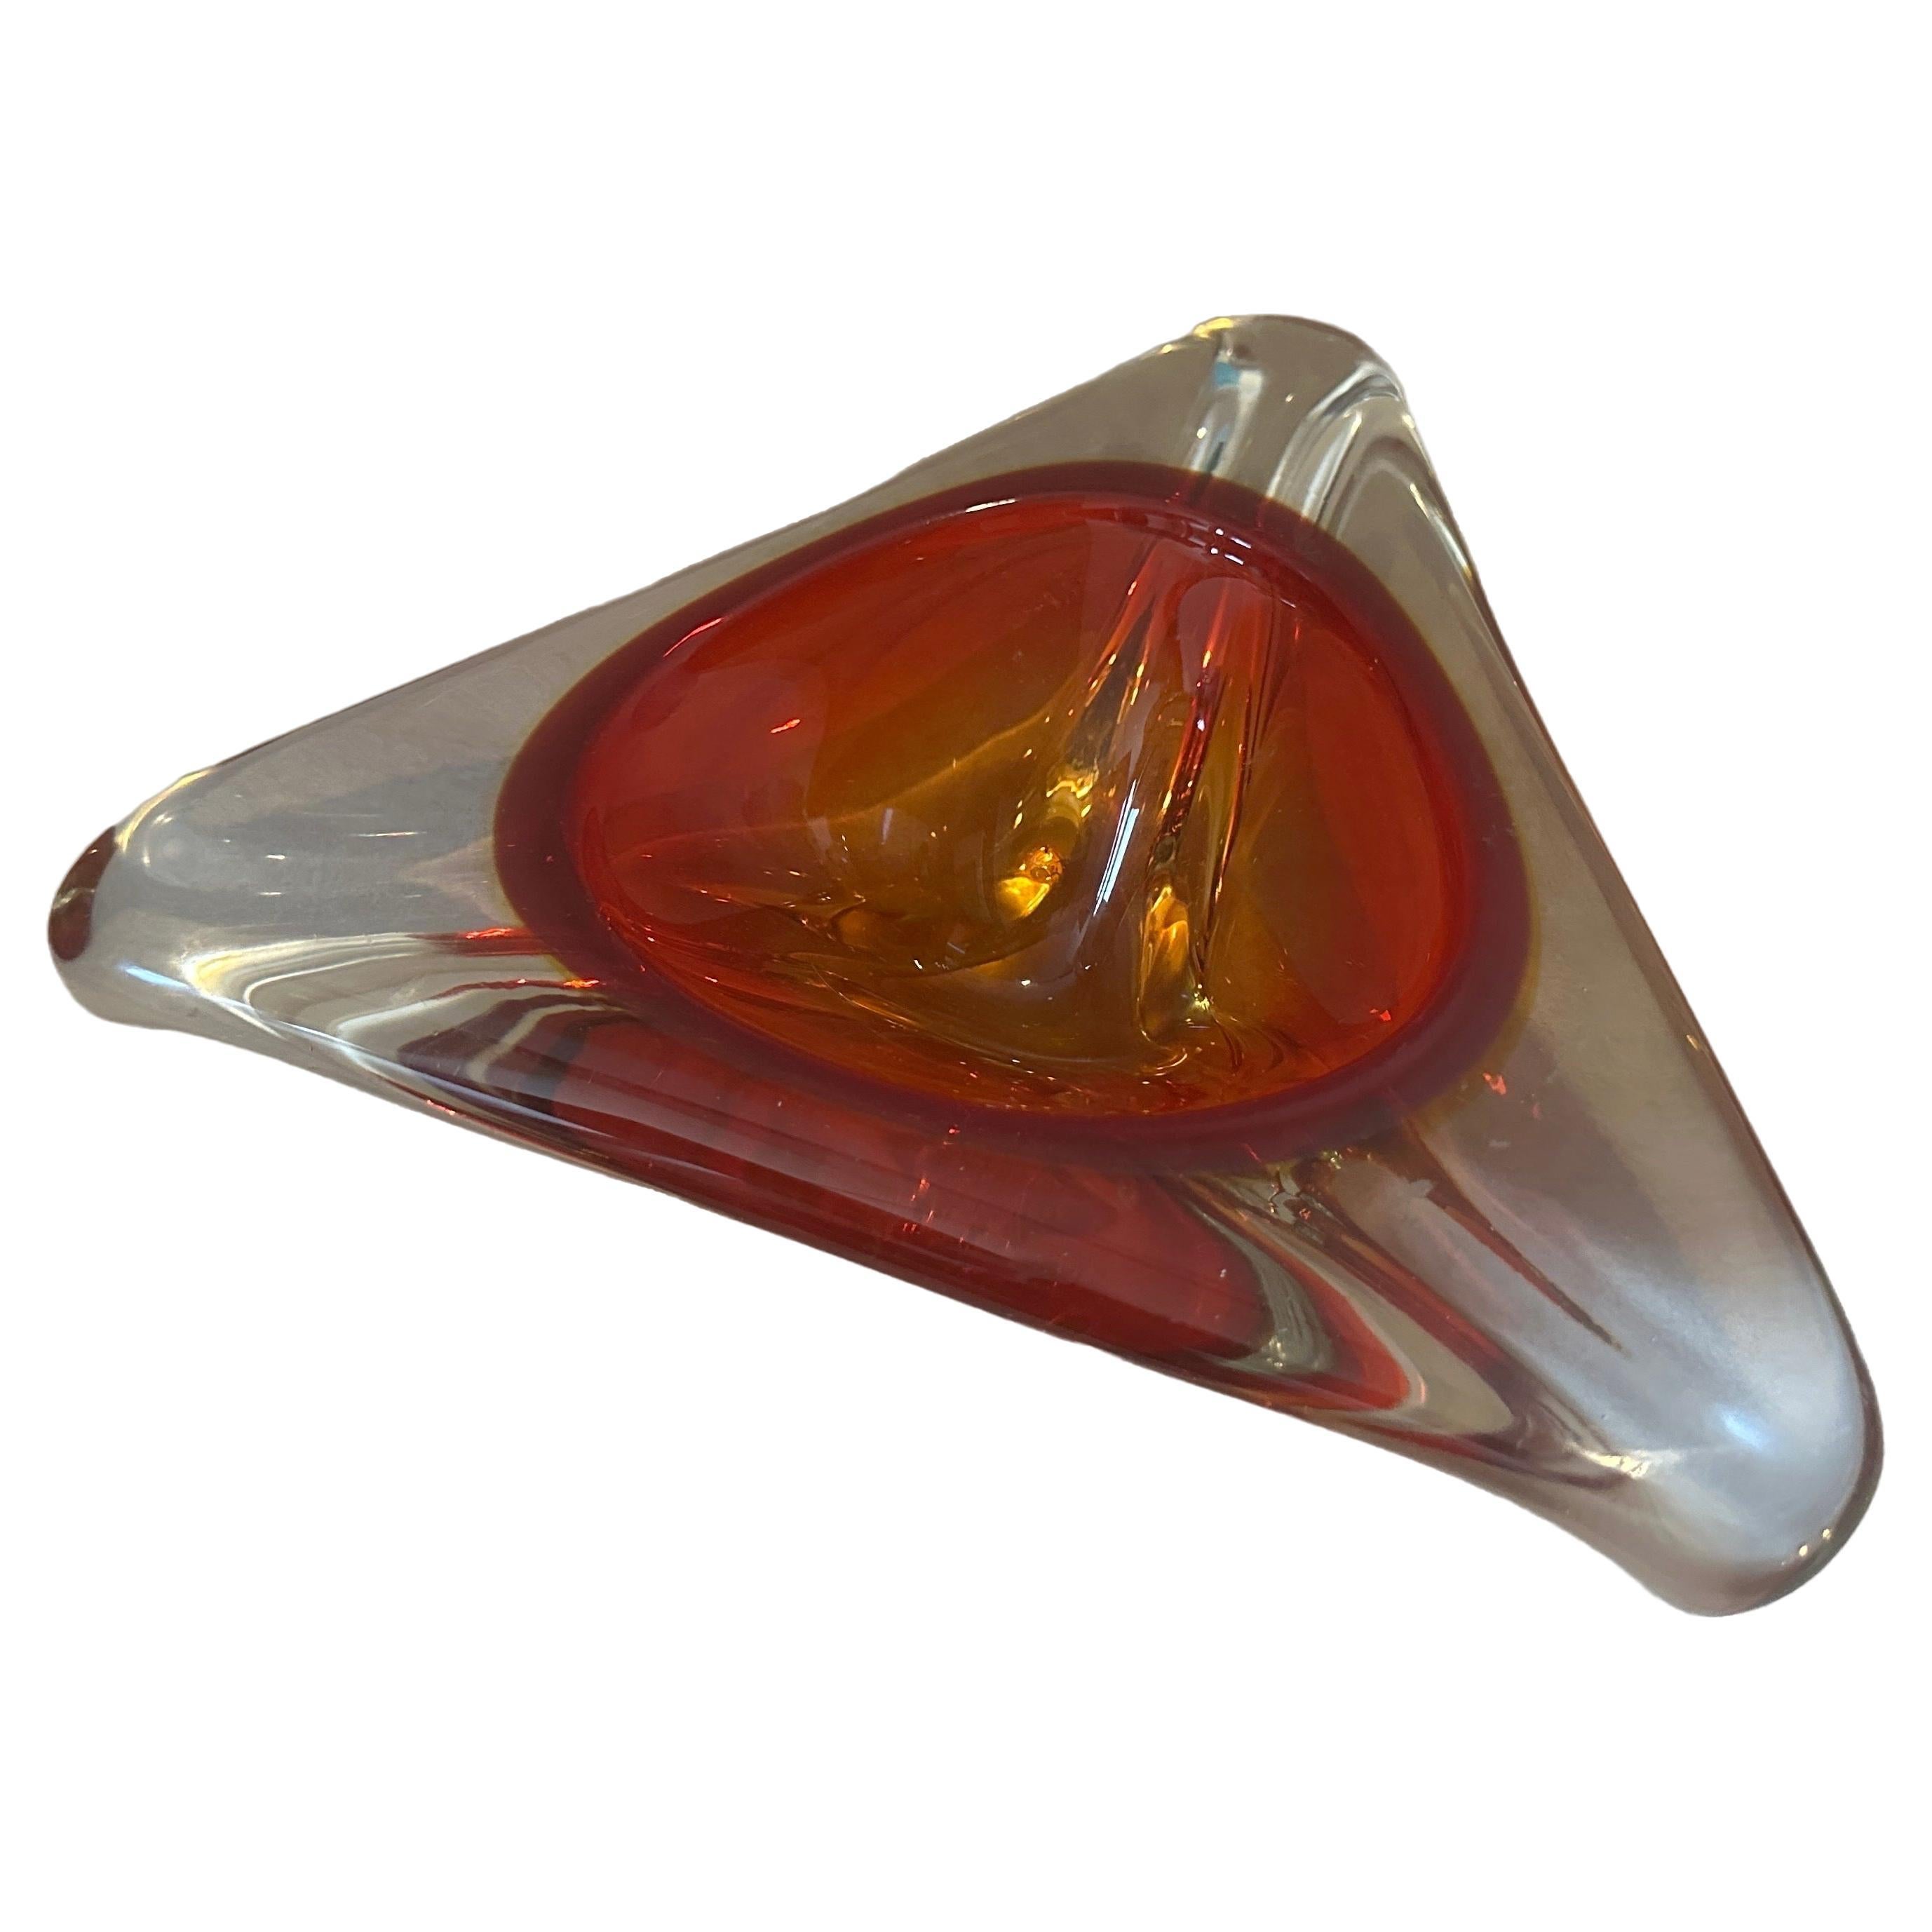 A perfect condition red and orange sommerso murano glass hand-crafted in Venice by Seguso, Murano glass, renowned for its quality and artistry. The 